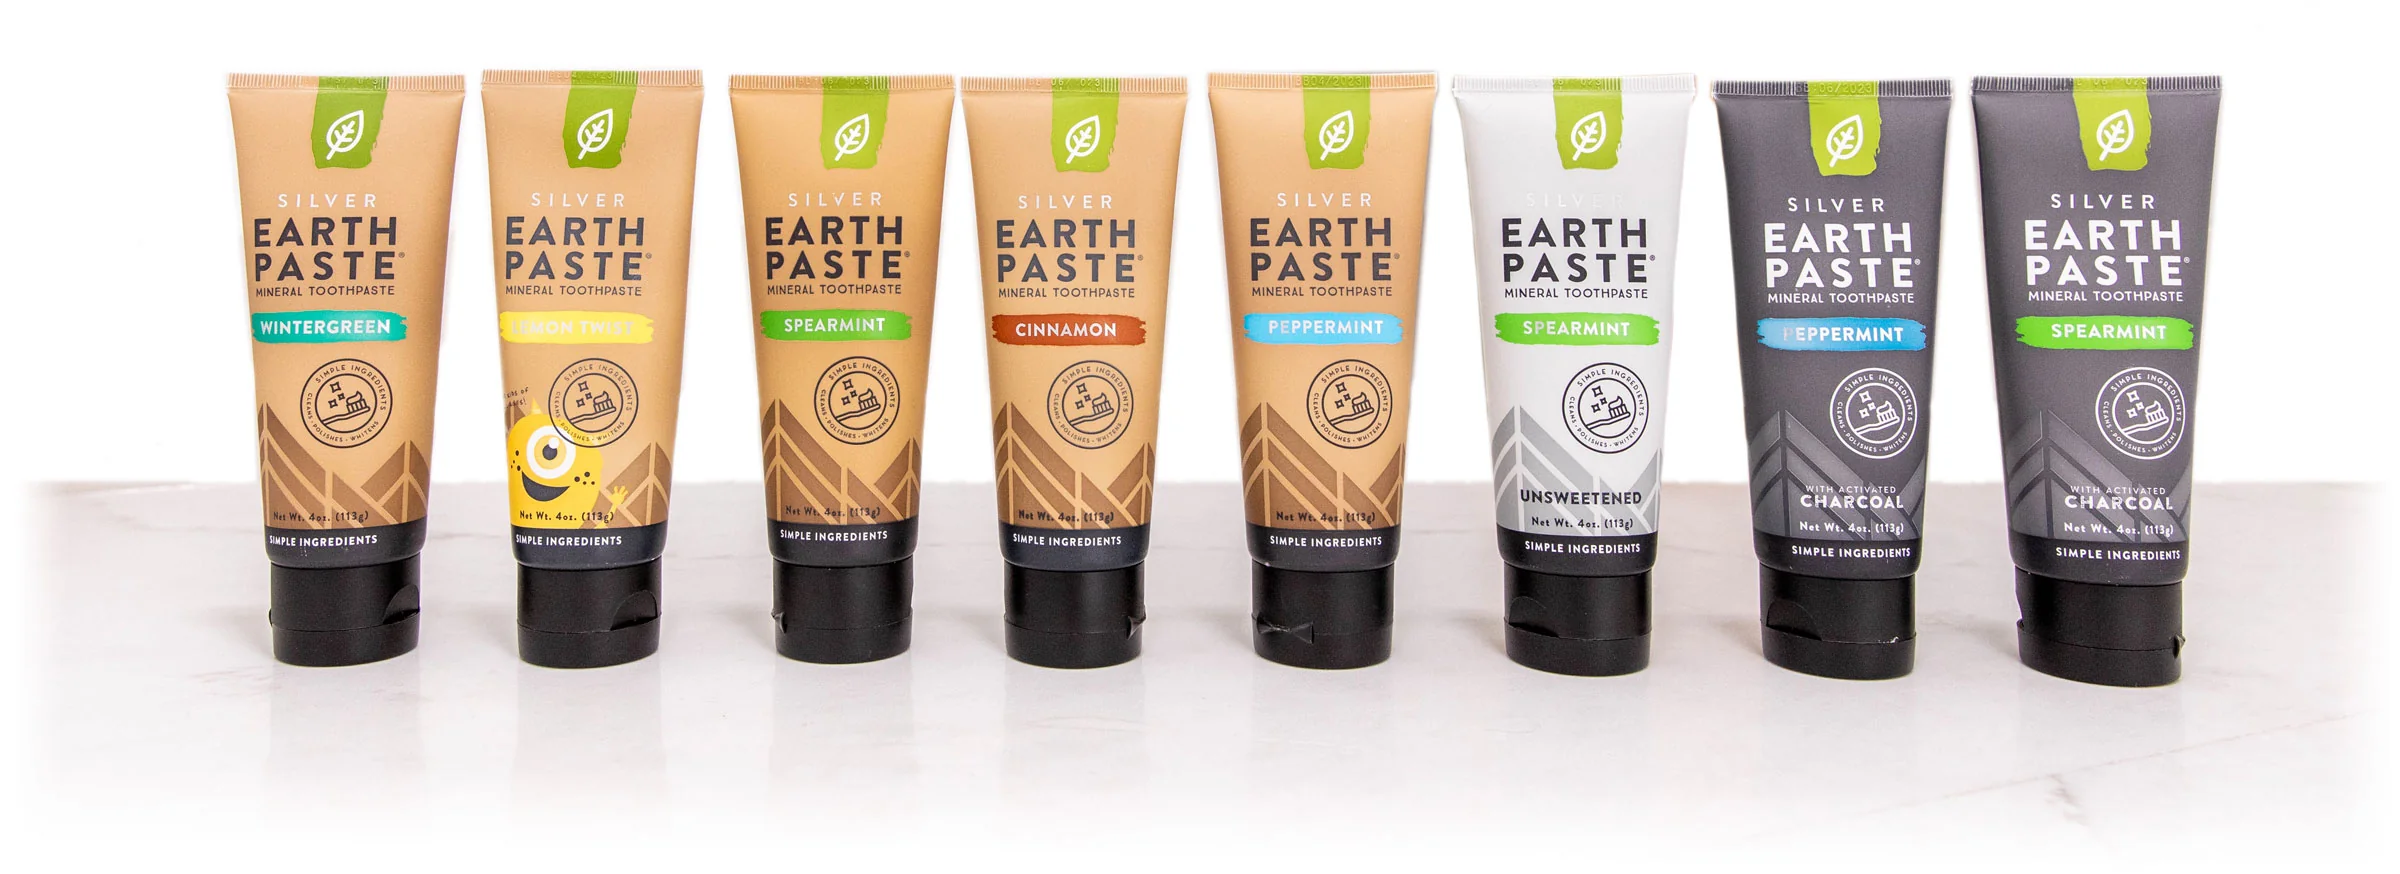 Redmond Earth Paste product line and flavors.